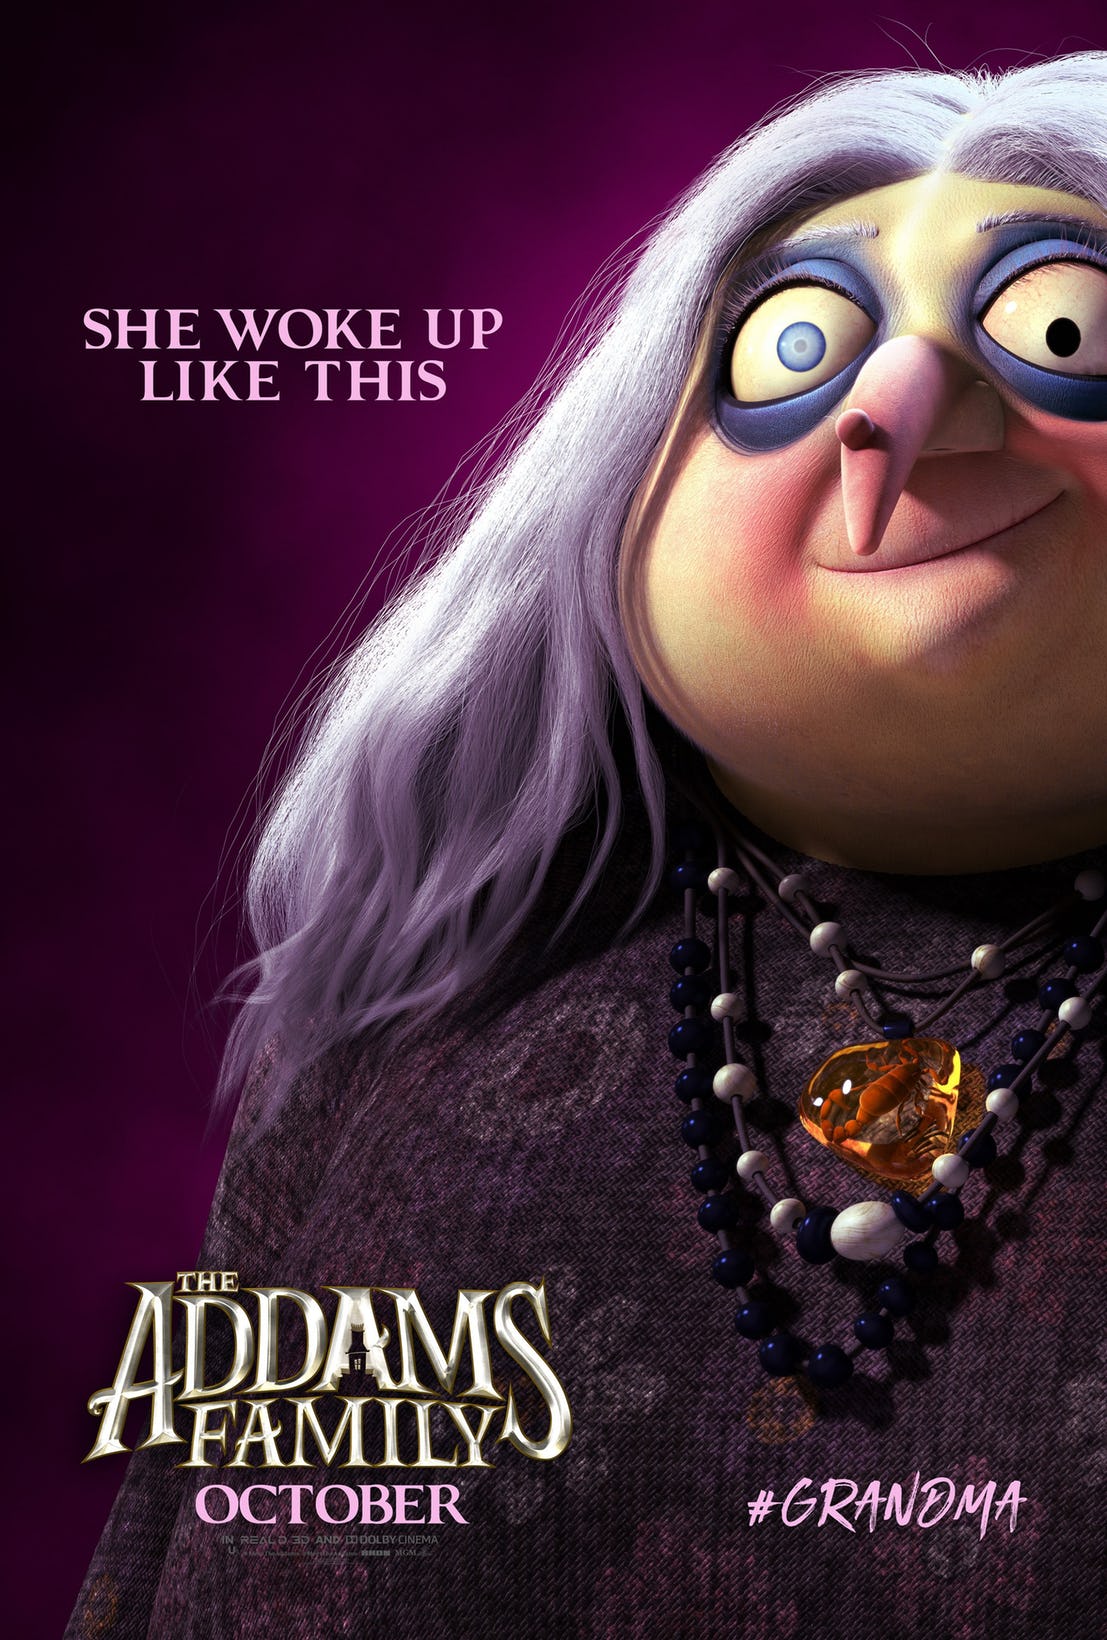 The ‘Addams Family’ Releases 9 New Character Posters – YBMW